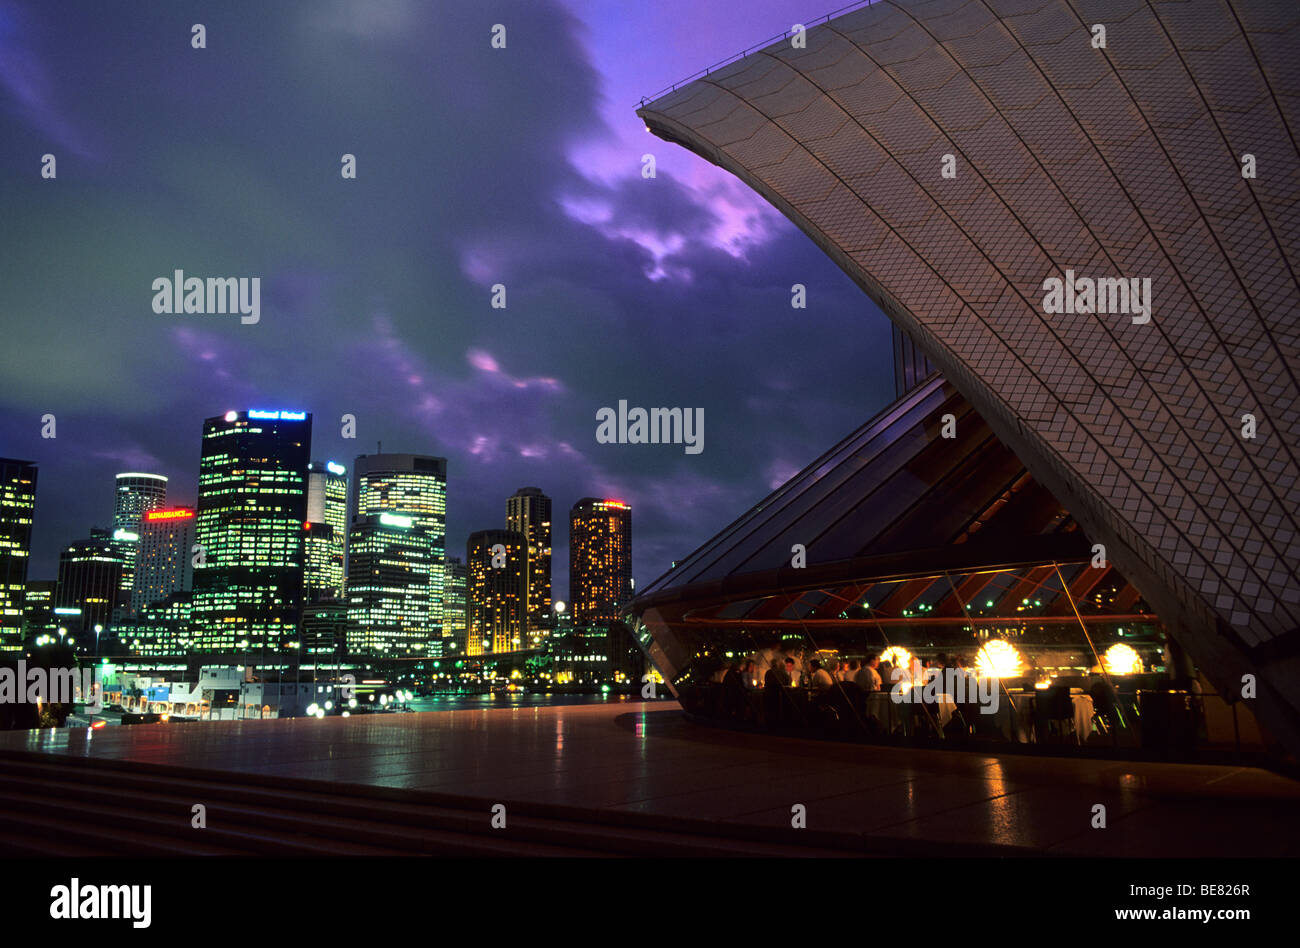 People inside the Bennelong Restaurant at the Opera House and illuminated high rise buildings, Sydney, New South Wales, Australi Stock Photo